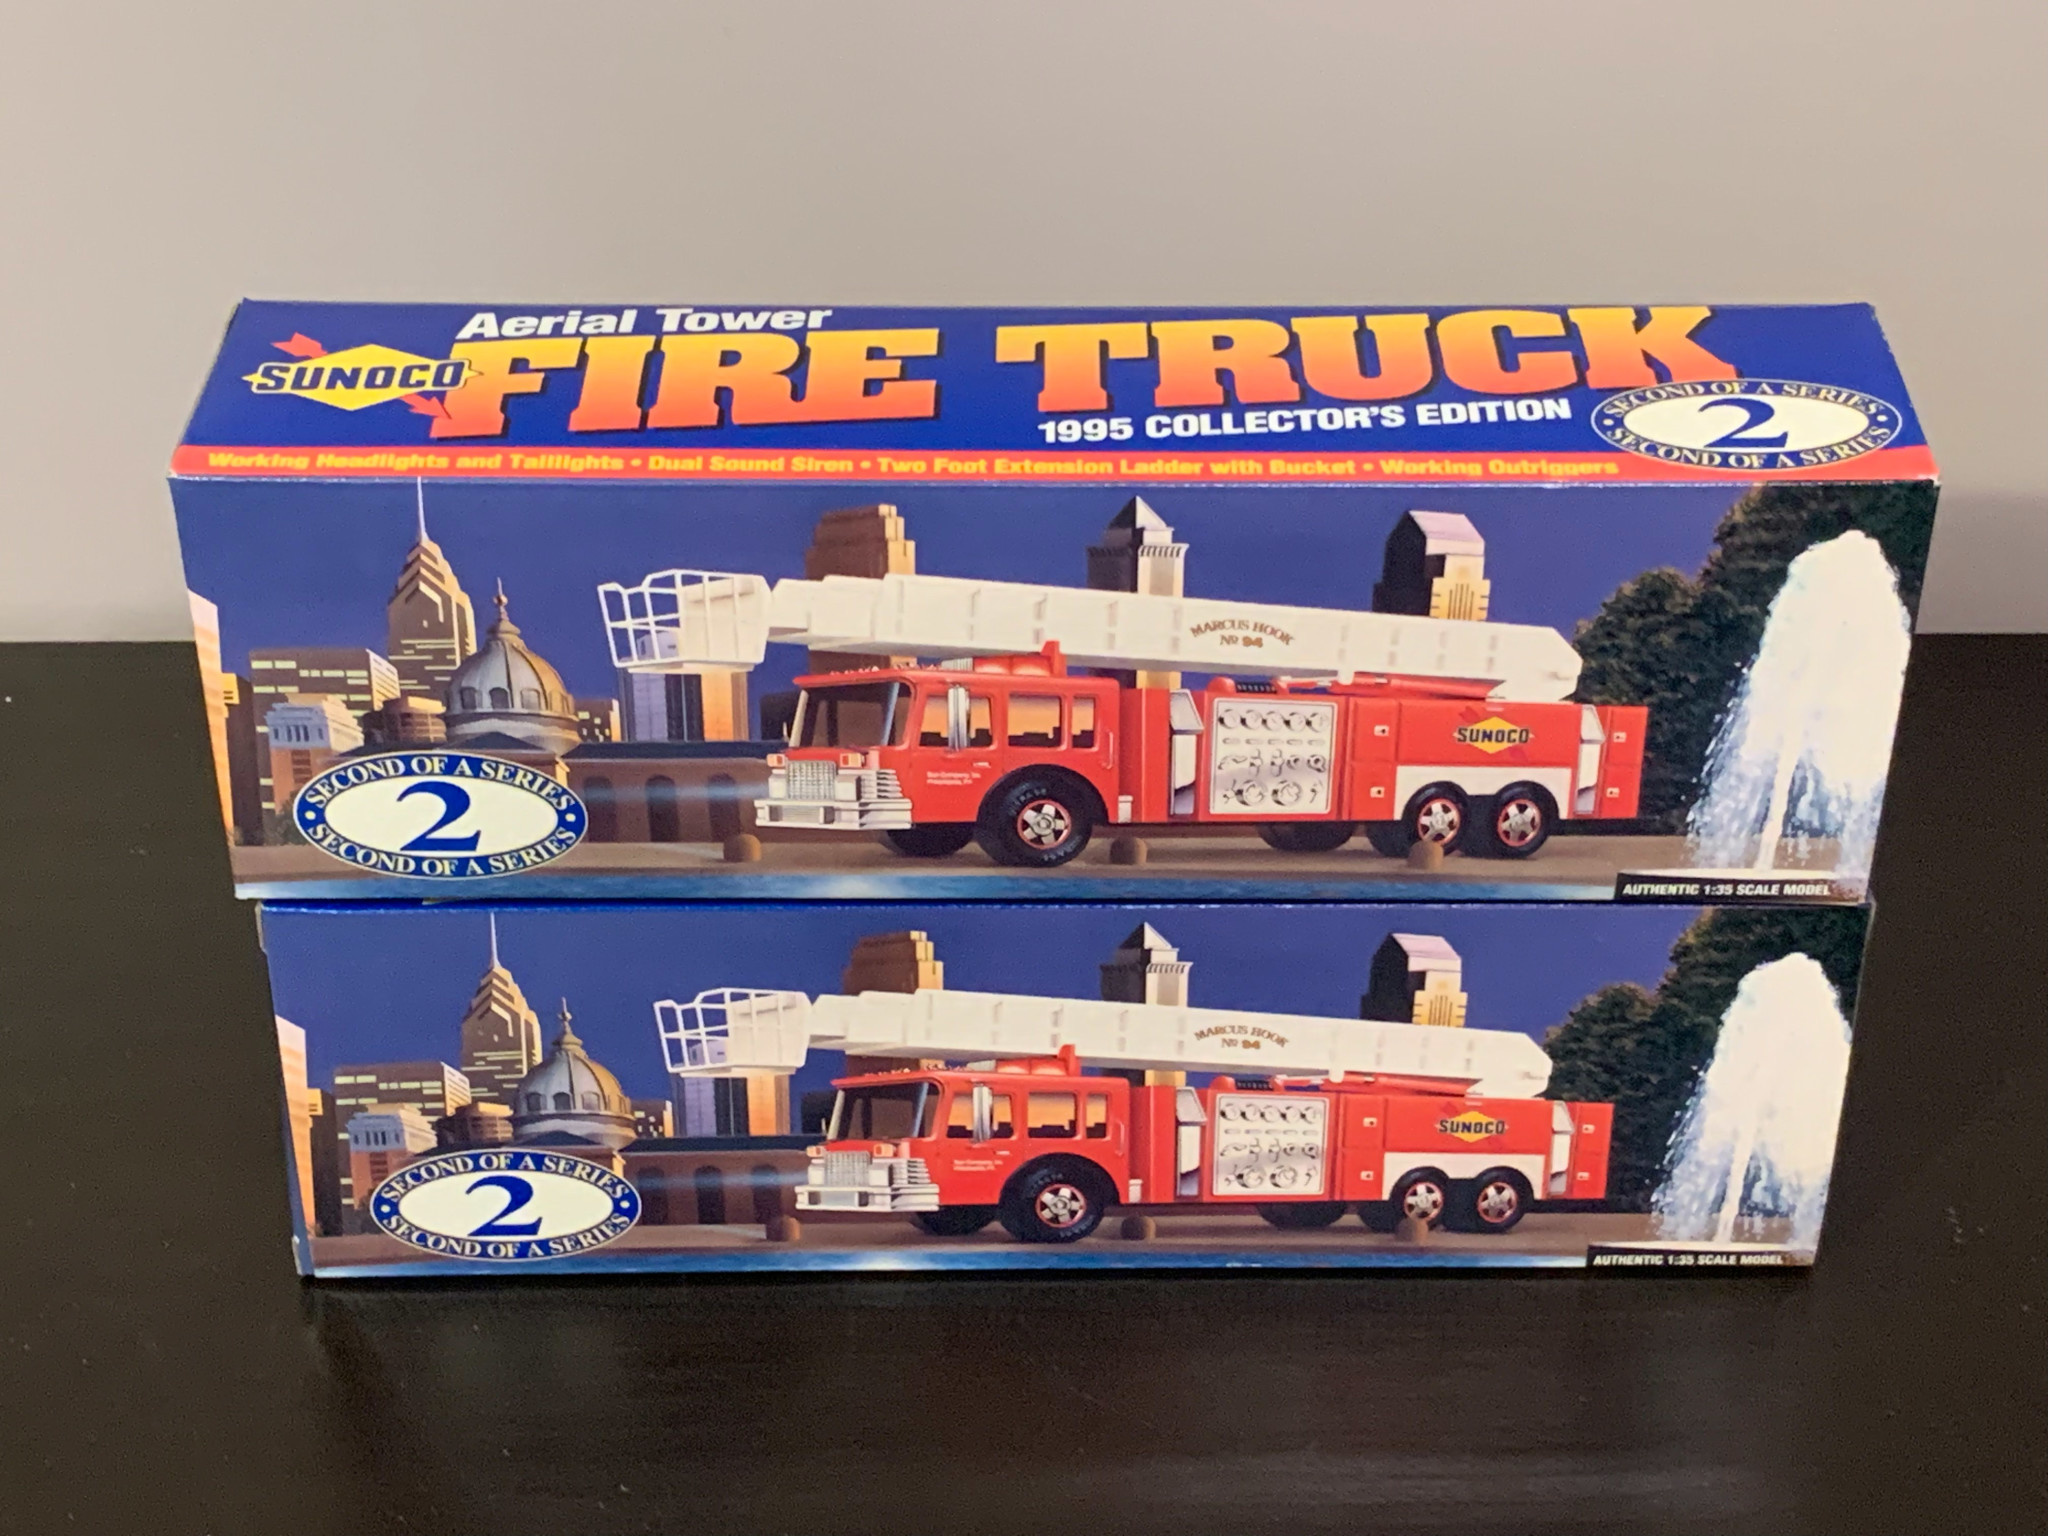 1995 Sunoco Aerial Tower Fire Truck